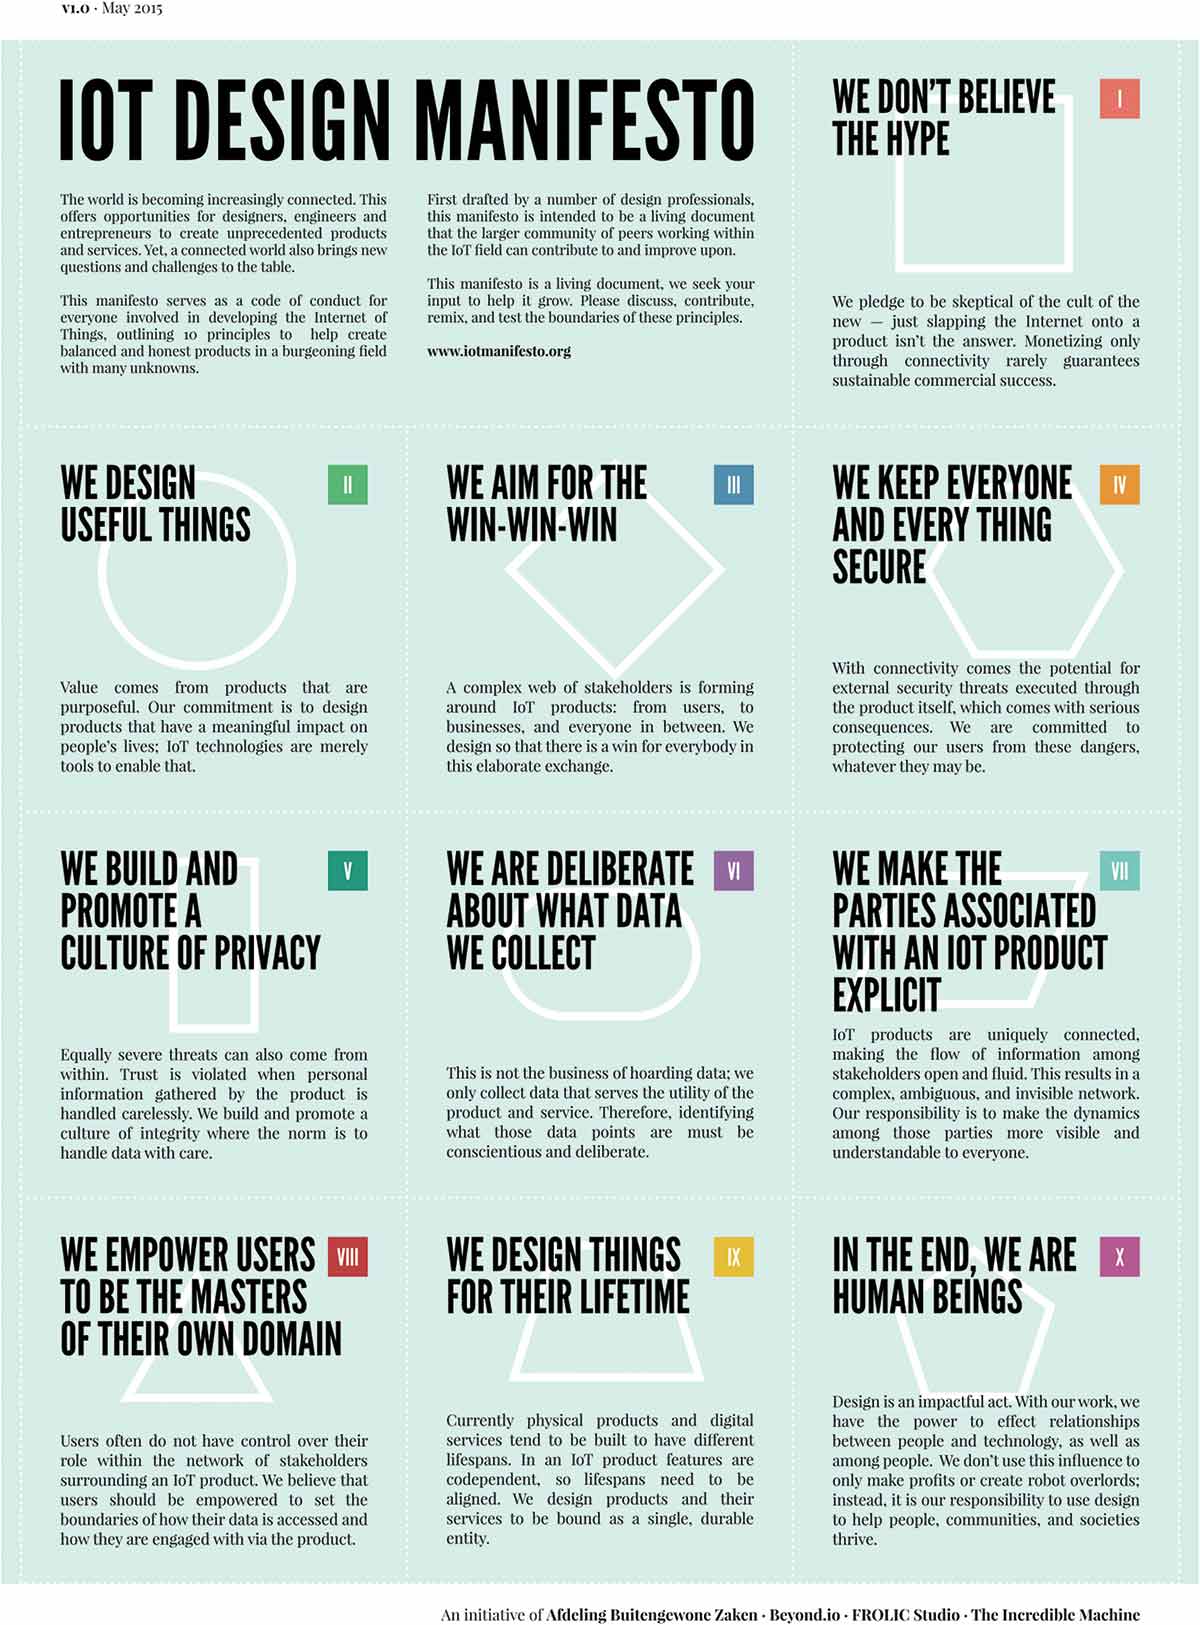 Figure 4. The Internet of Things design manifesto (IoT manifesto) is a collection of 10 principles to promote the responsible design of IoT products (Afdeling Buitengewone Zaken et al. 2015). Image: Just things foundation.